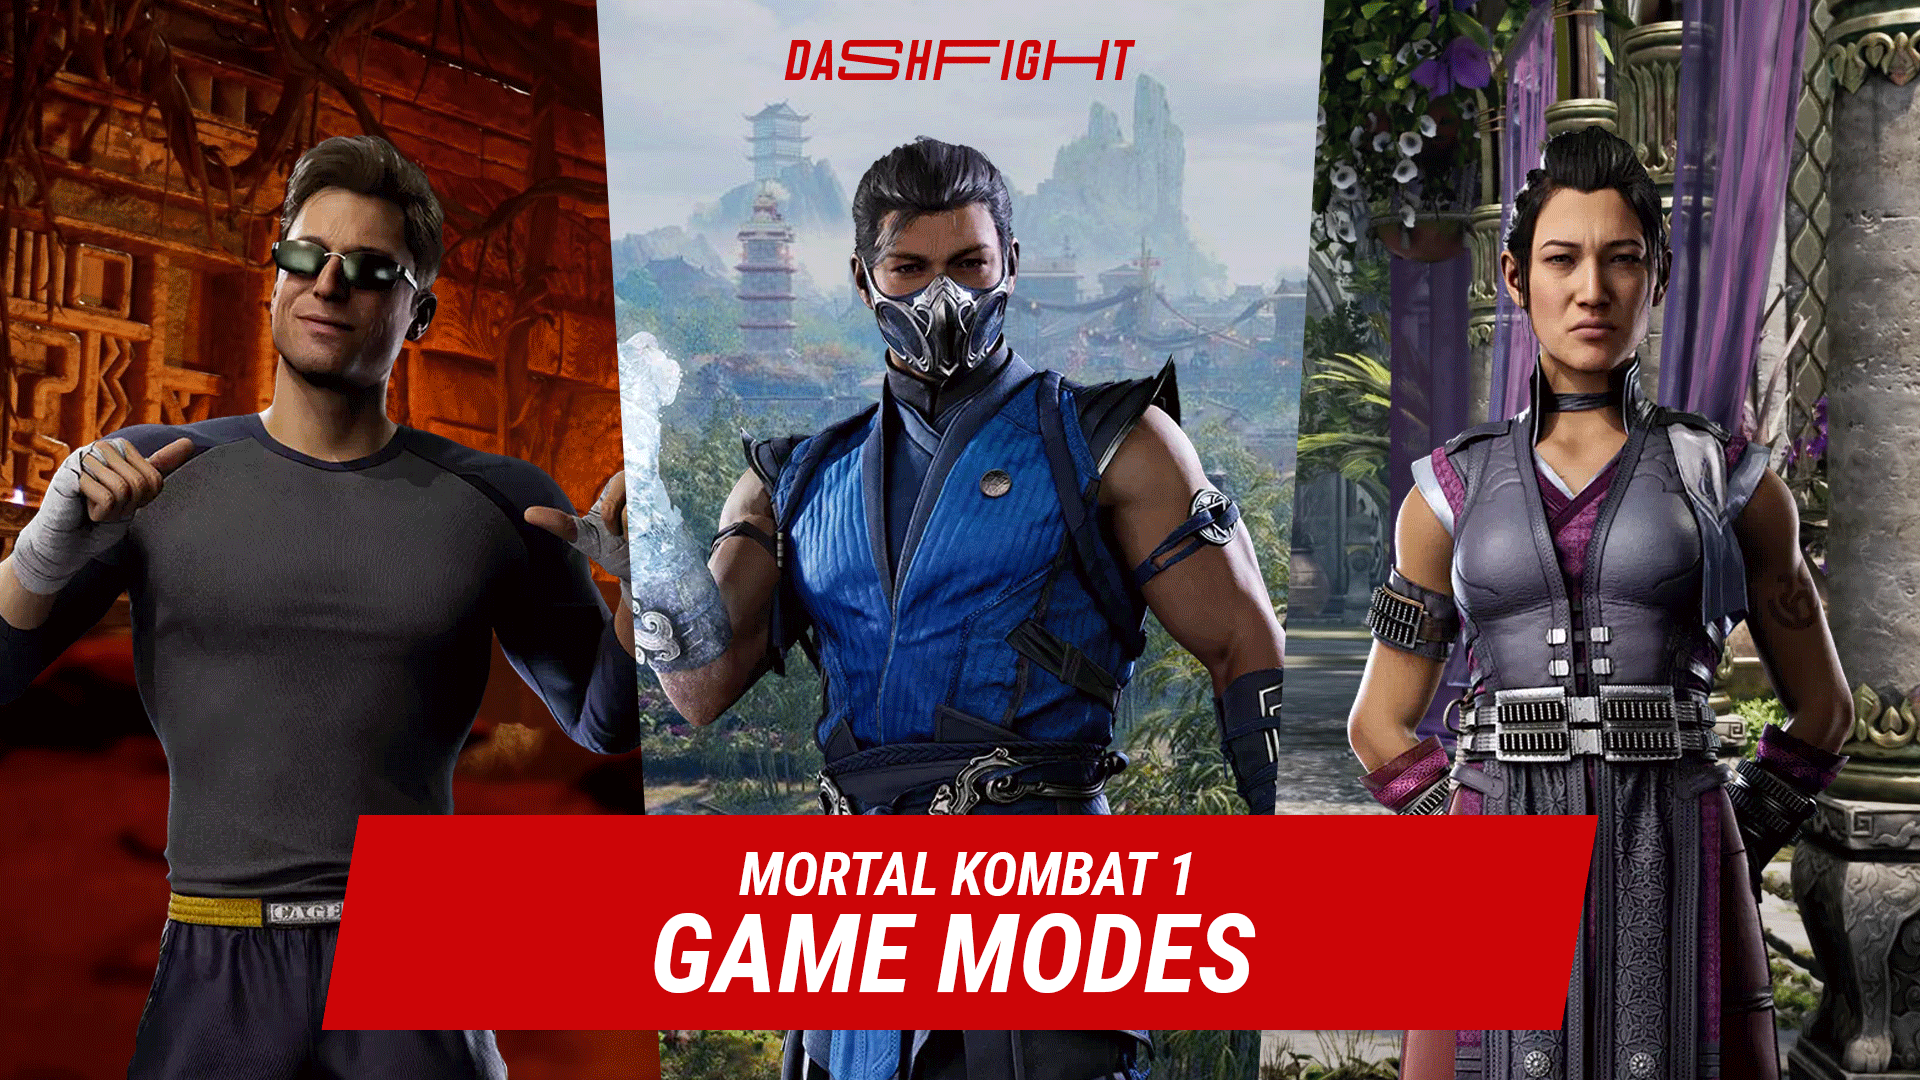 How to play Mortal Kombat 11 with friends